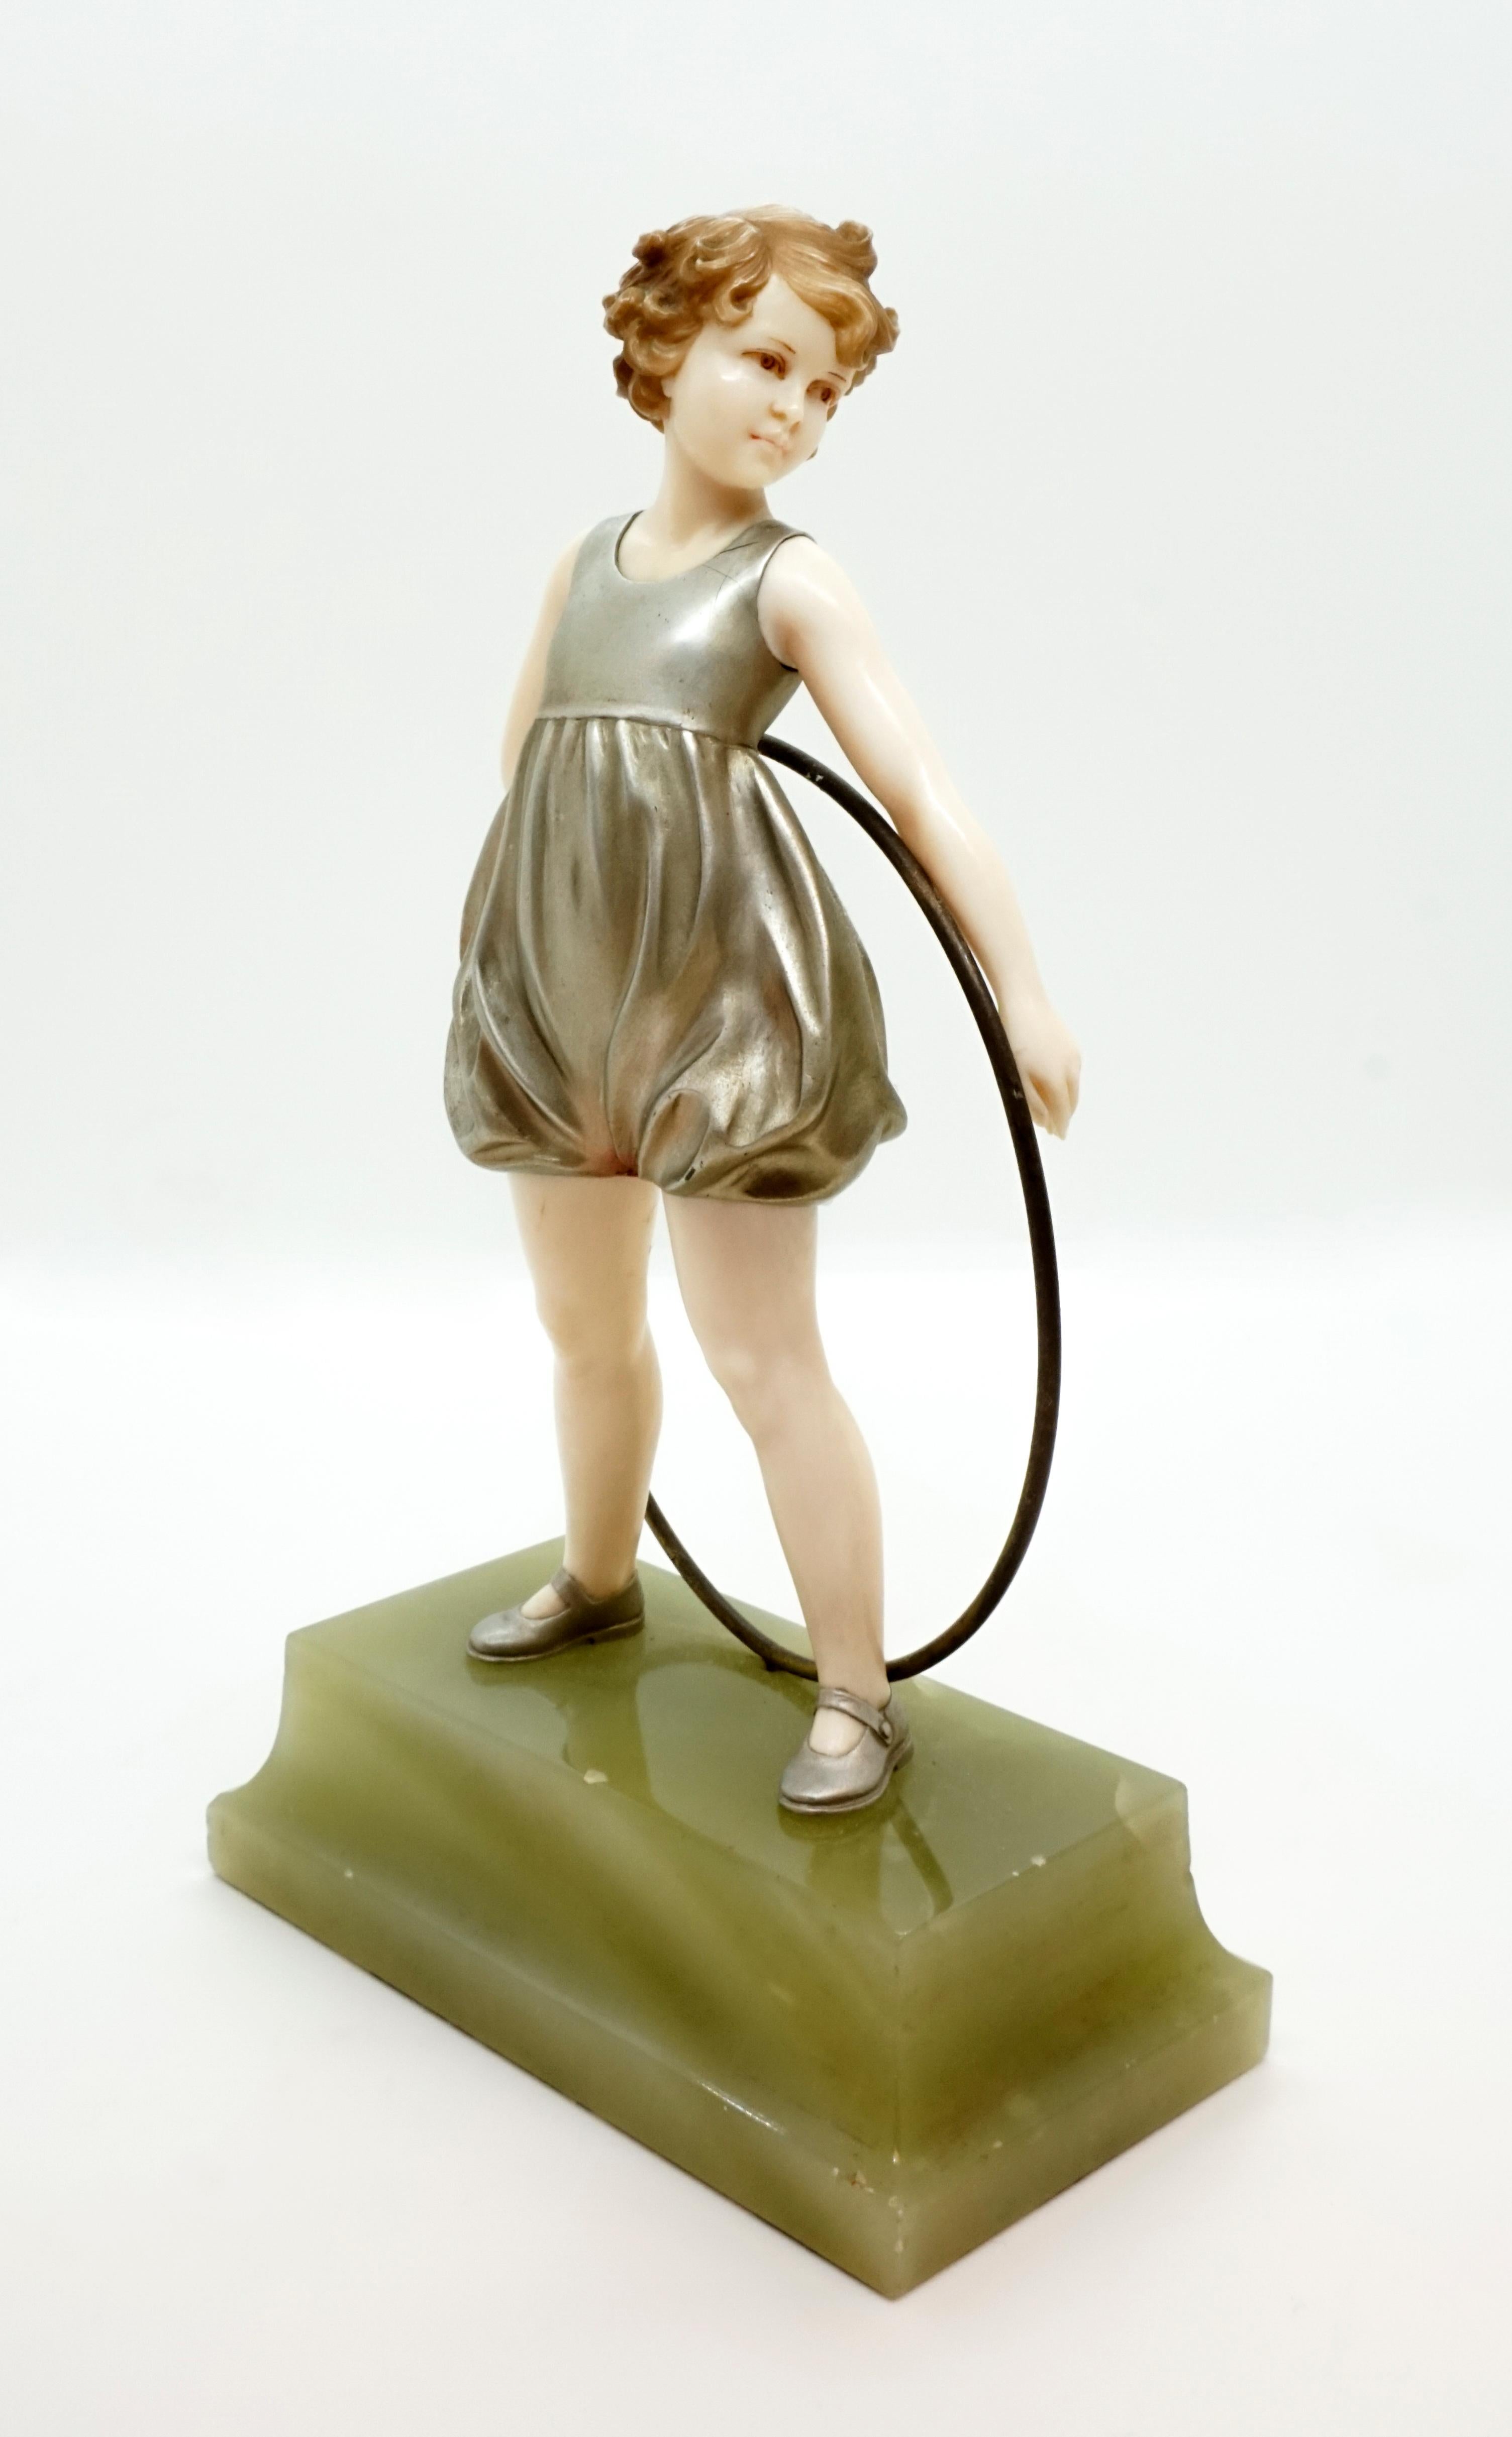 Early 20th Century Pair of Art Deco Child Figurines 'Hoop Girl' & 'Sunny Boy' by Ferdinand Preiss